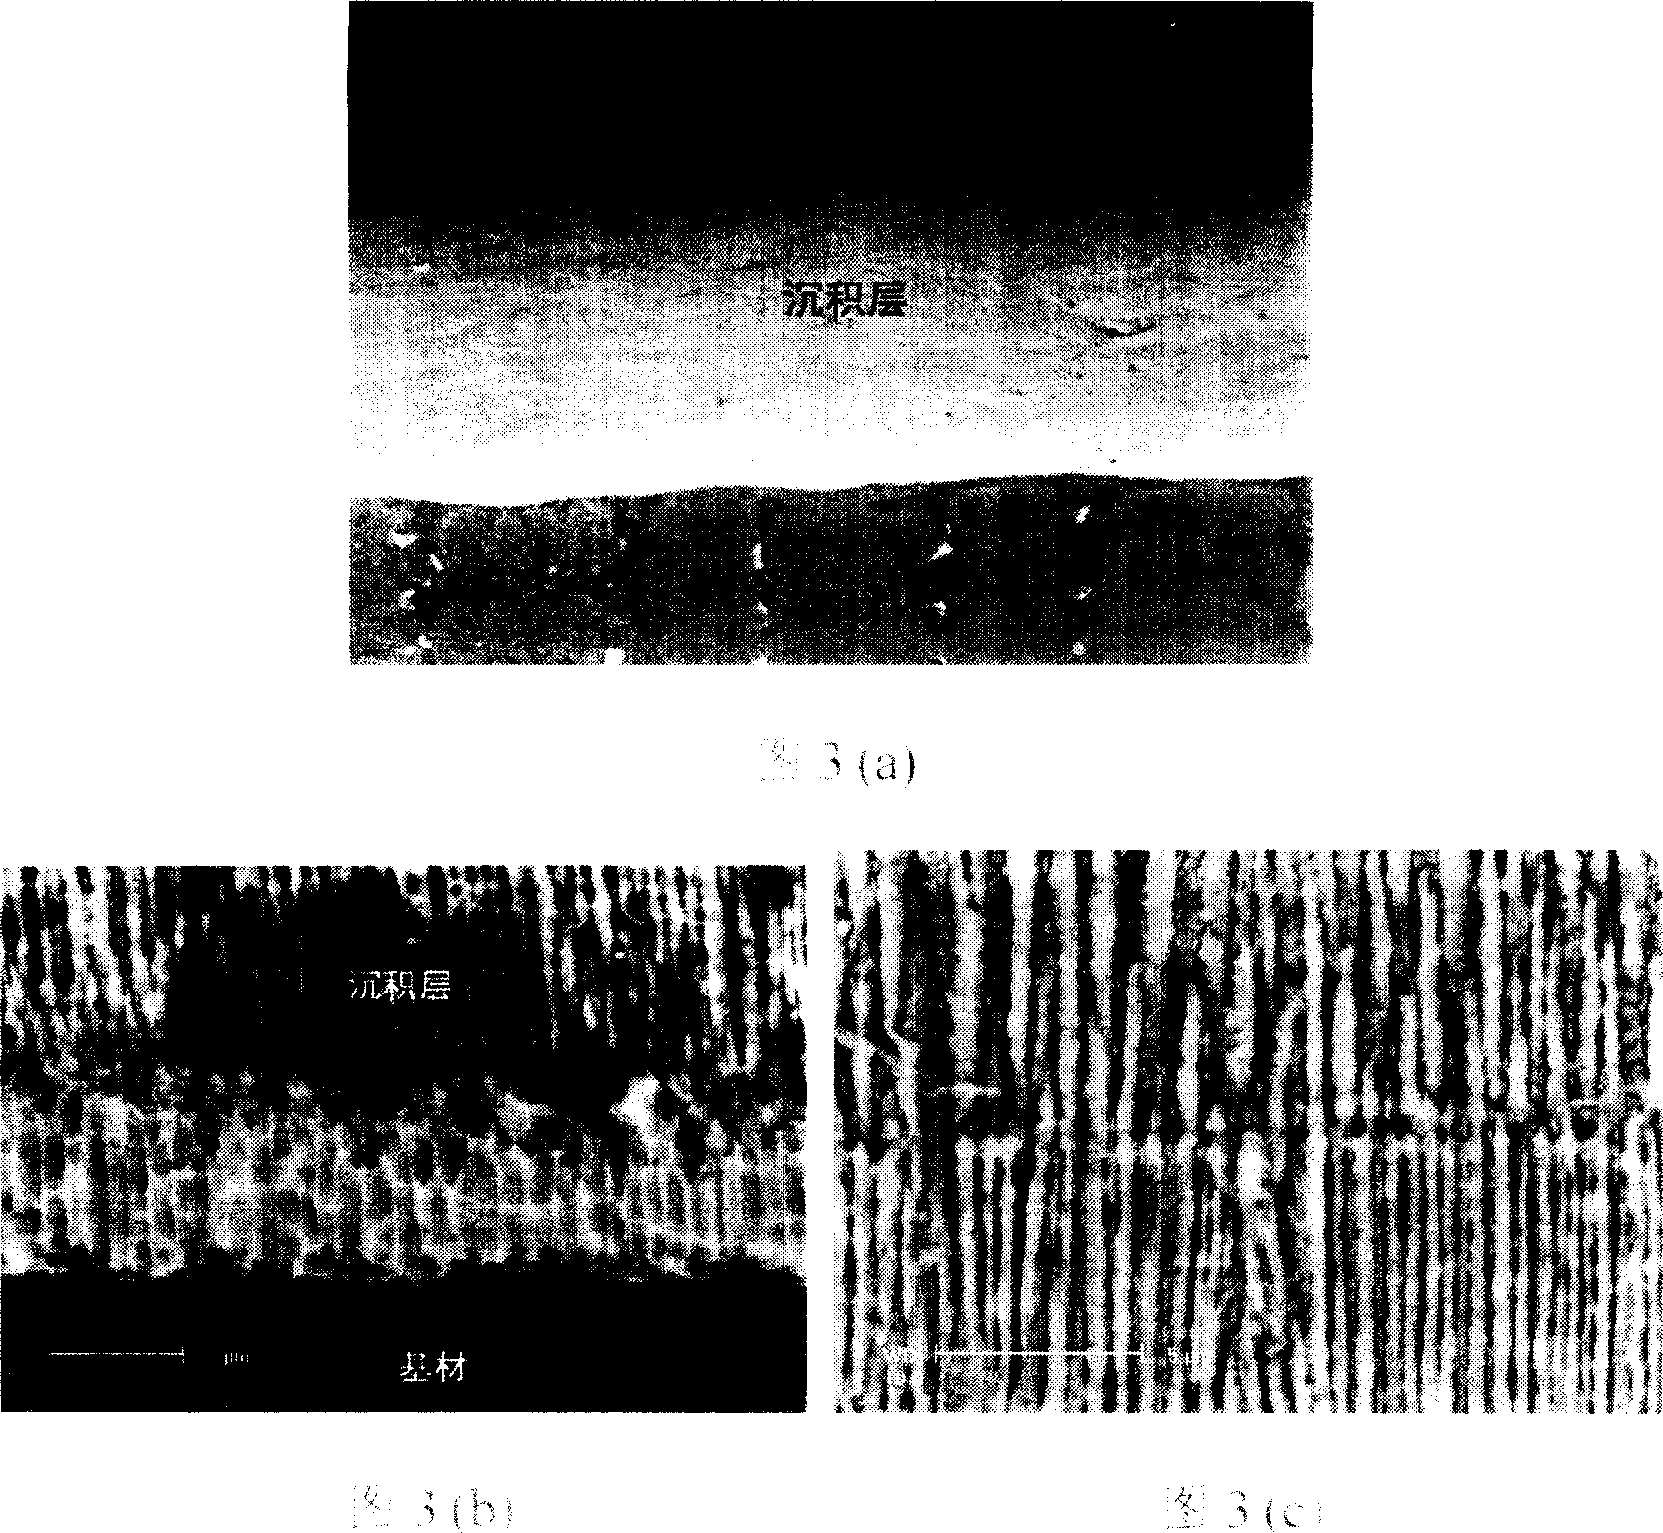 Directional freezing styloid or single-crystal nickel-base high-temperature alloy repairing or coating method